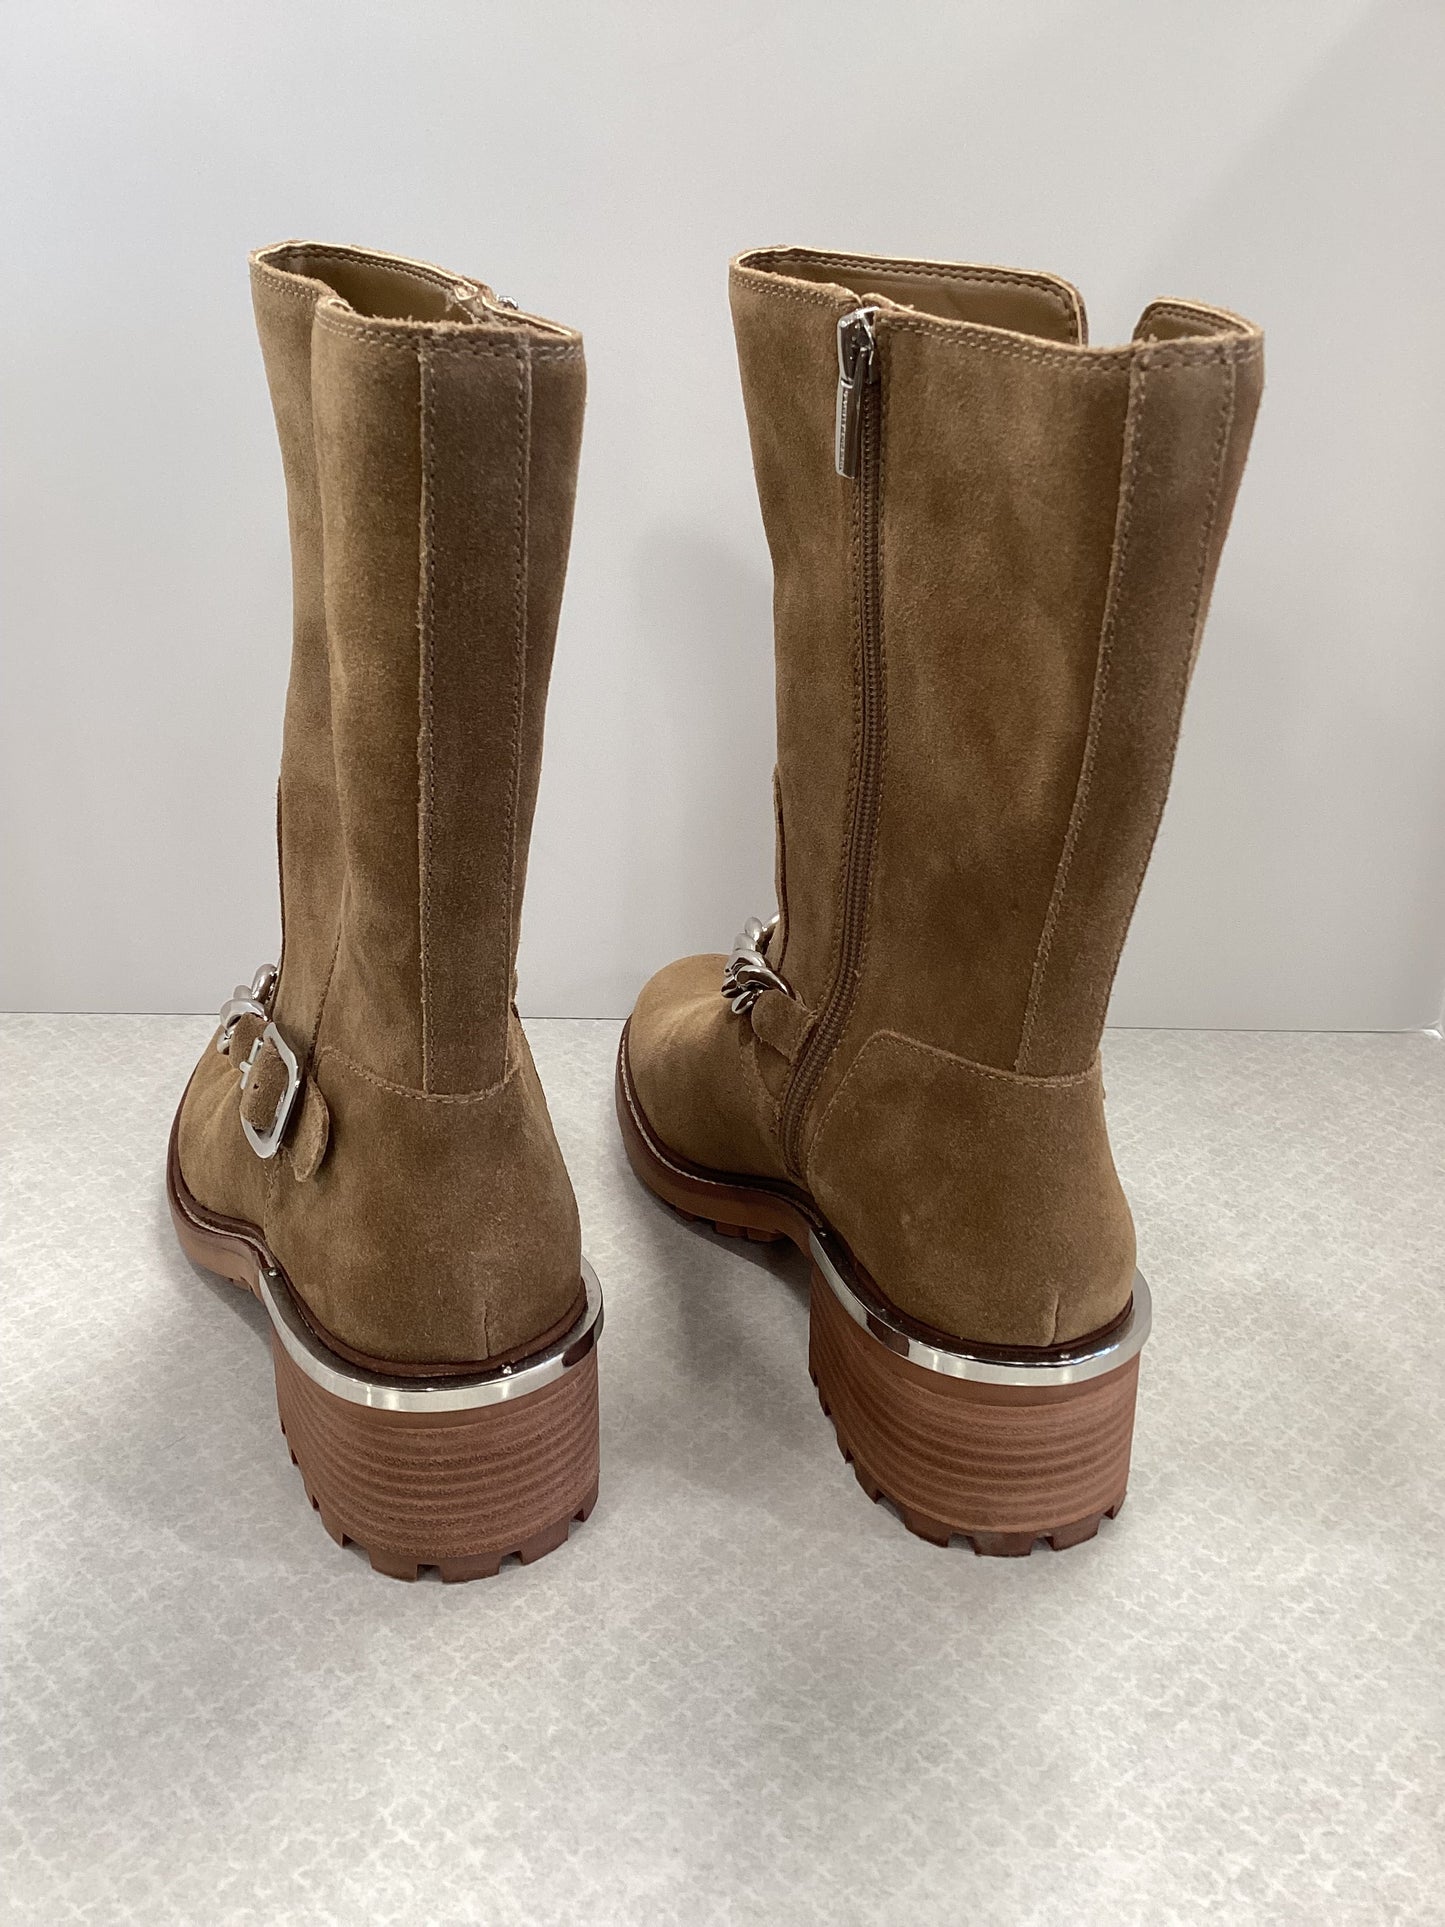 Boots Mid-calf Heels By Vince Camuto  Size: 9